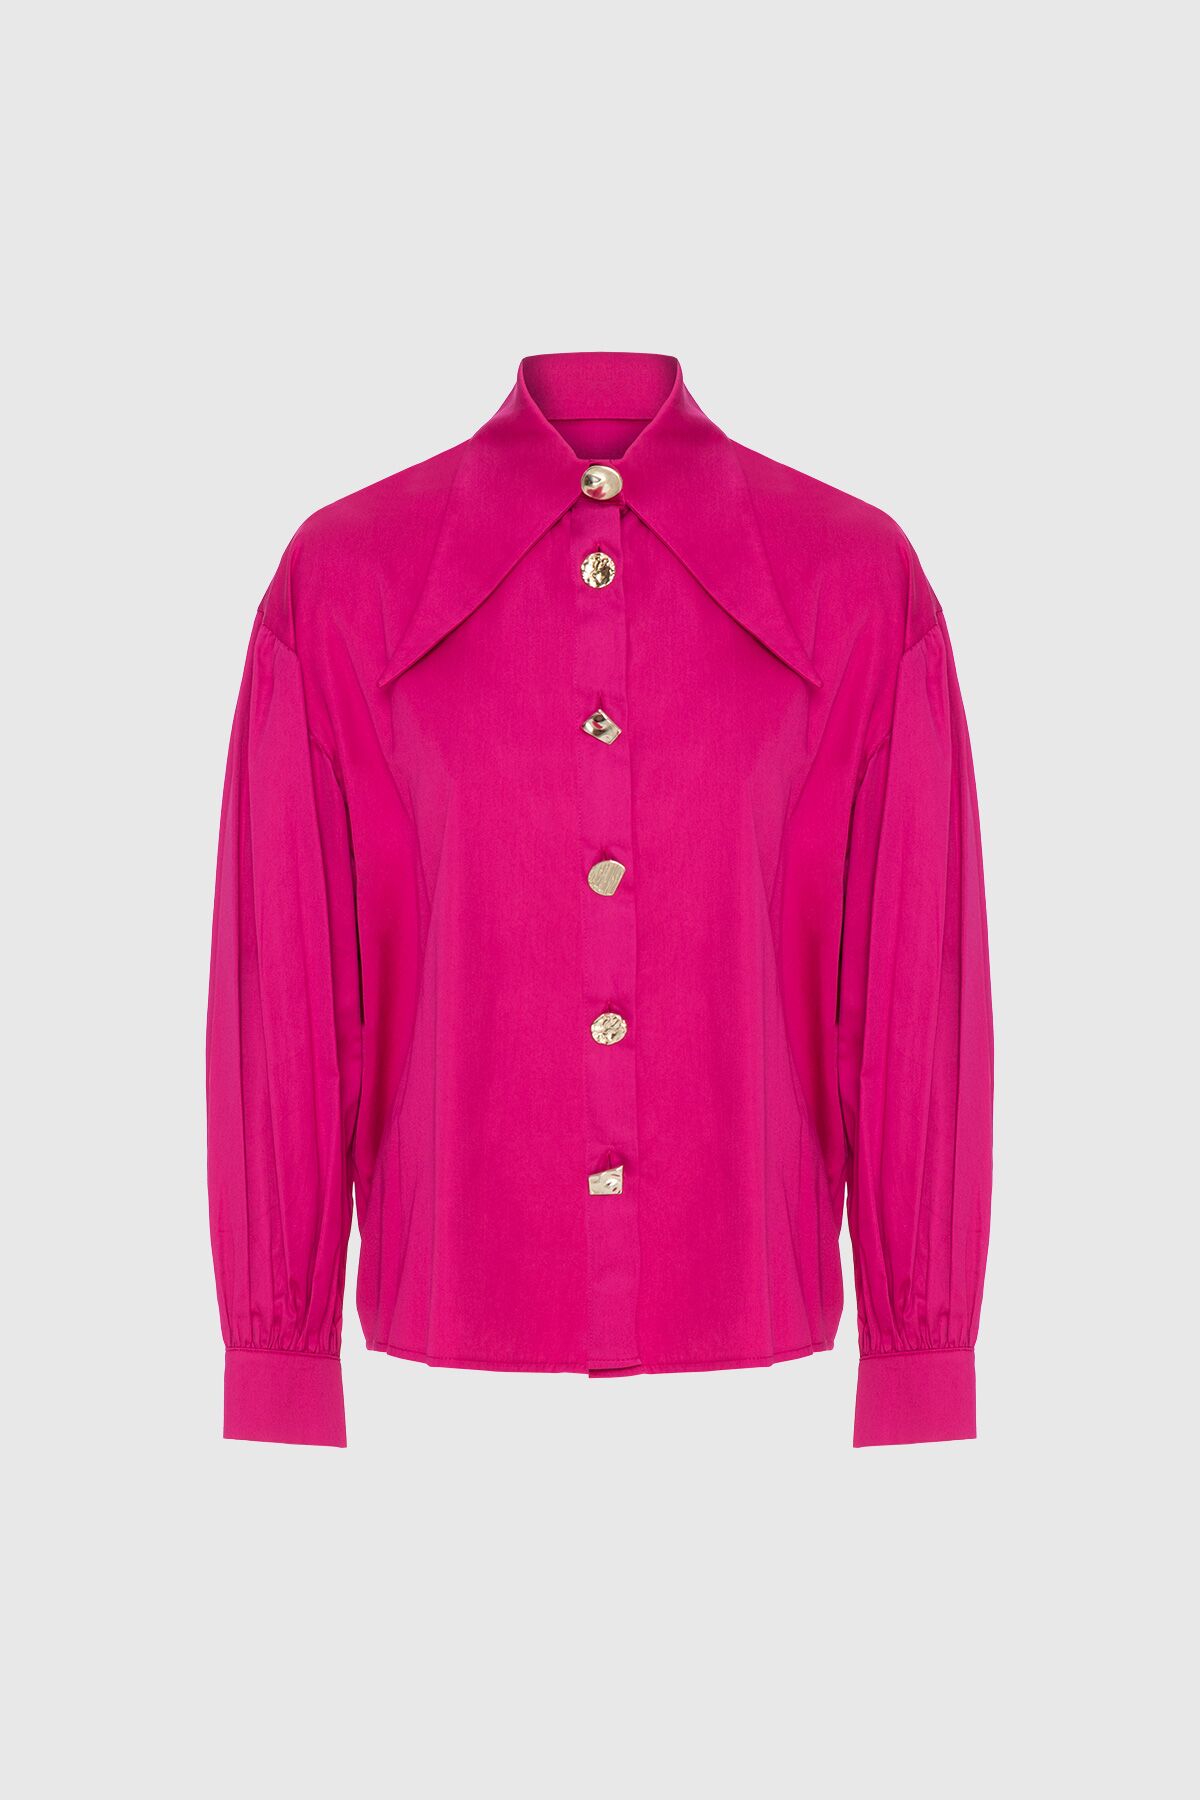 KIWE - Collar and Button Detailed Sleeves Pleated Design Pink Poplin Shirt